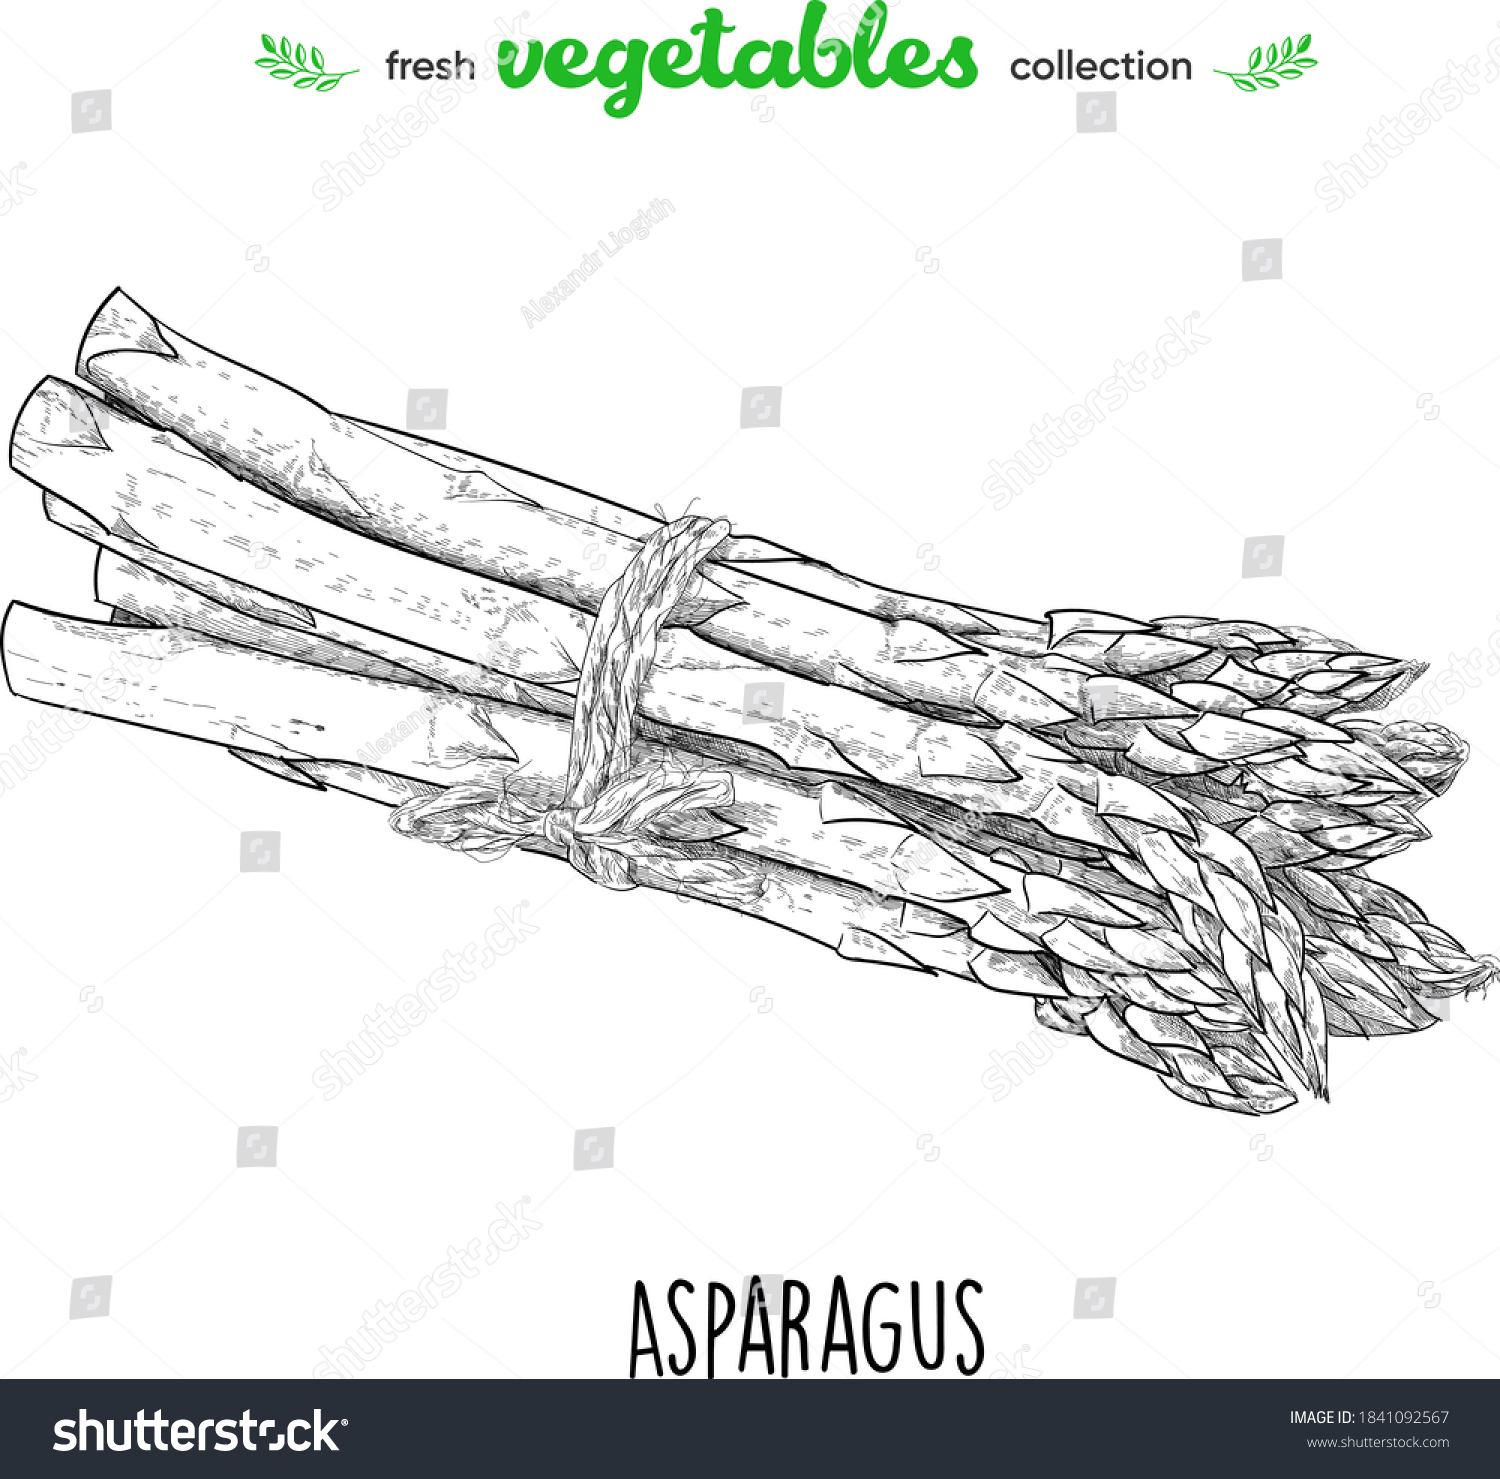 Asparagus. Detailed line art. Freehand drawing. Vector vegetables. Collection of fresh vegetables. #1841092567